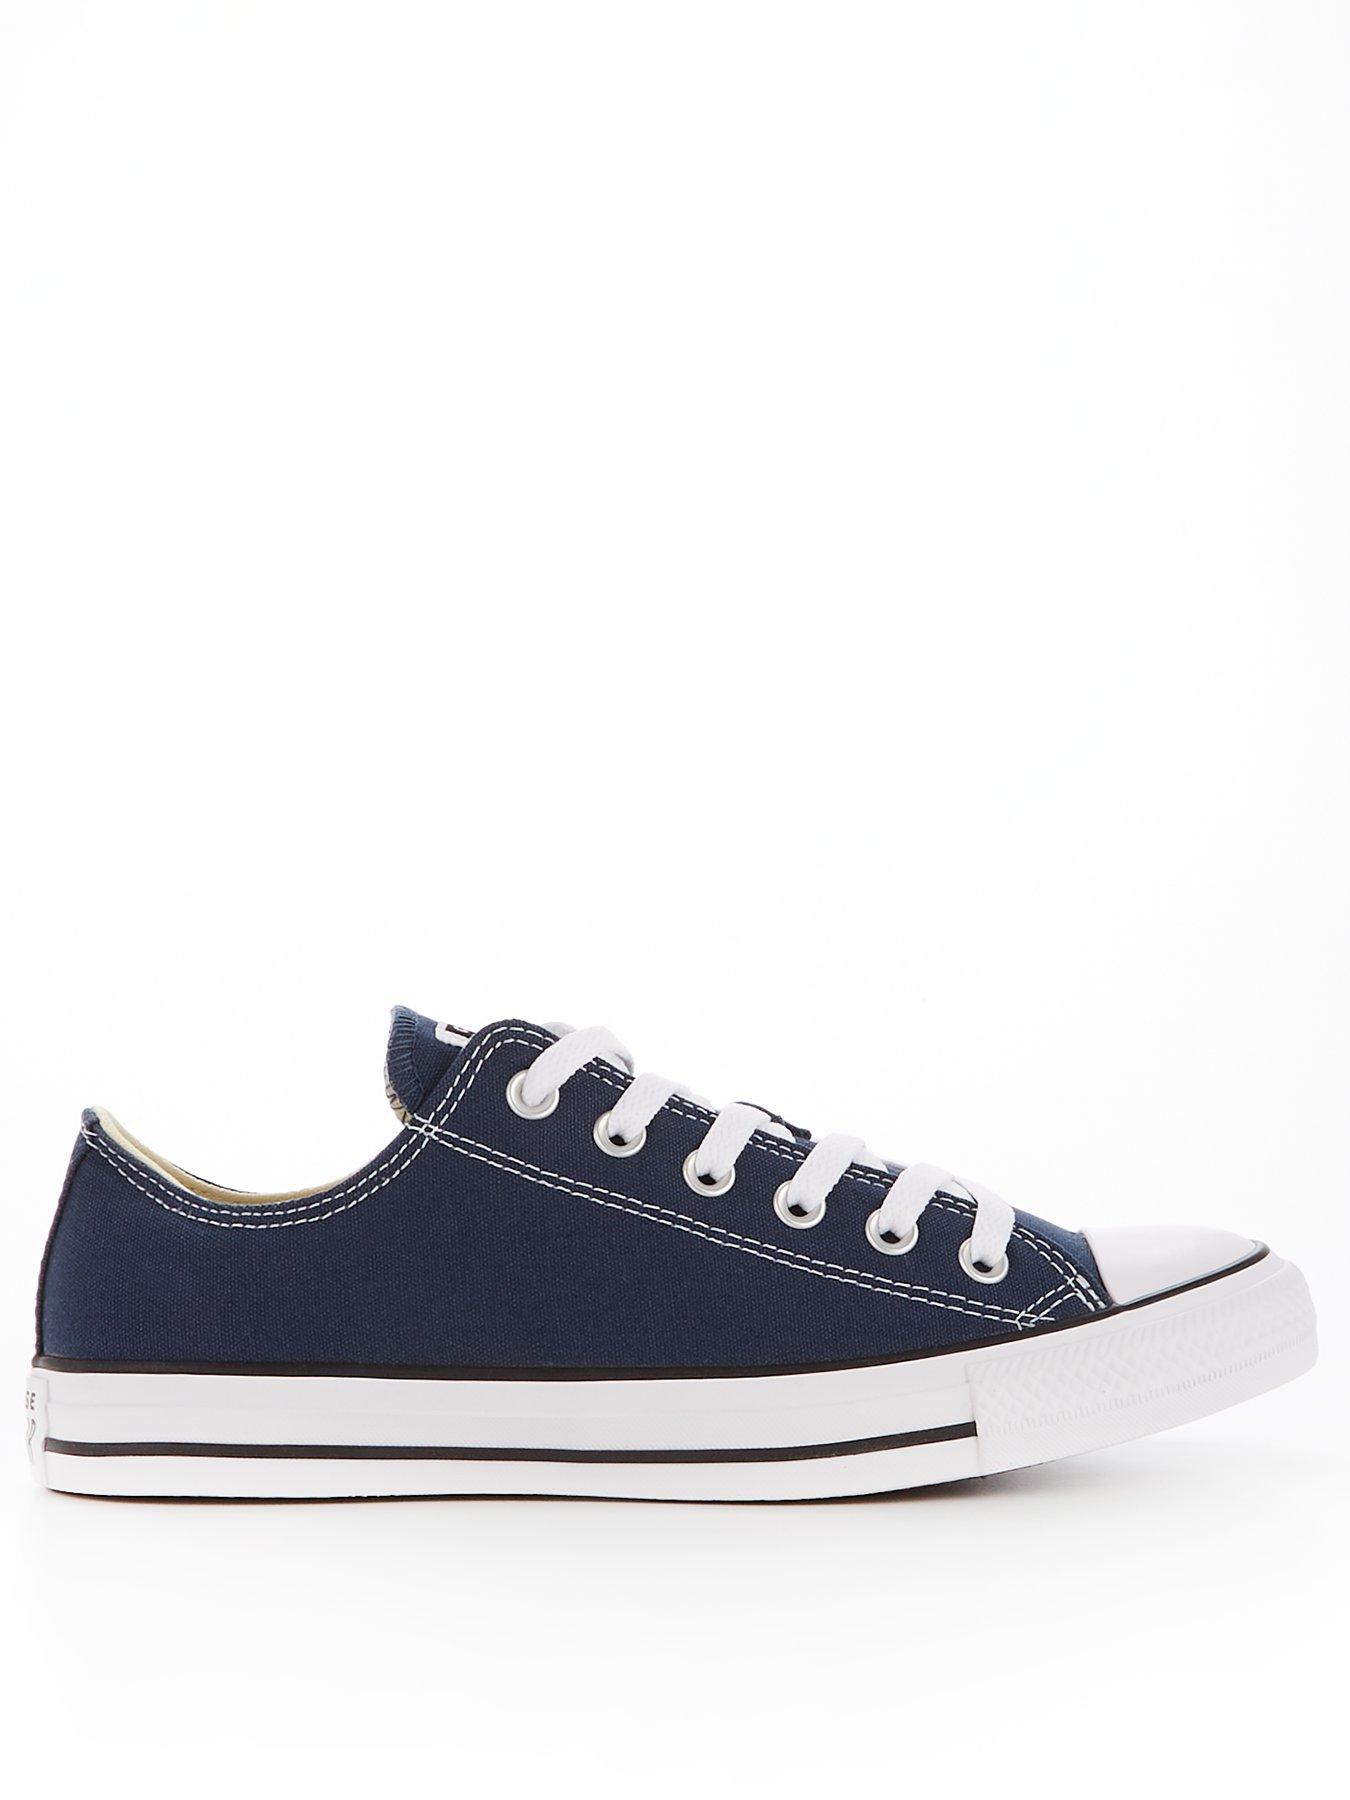 mens converse trainers